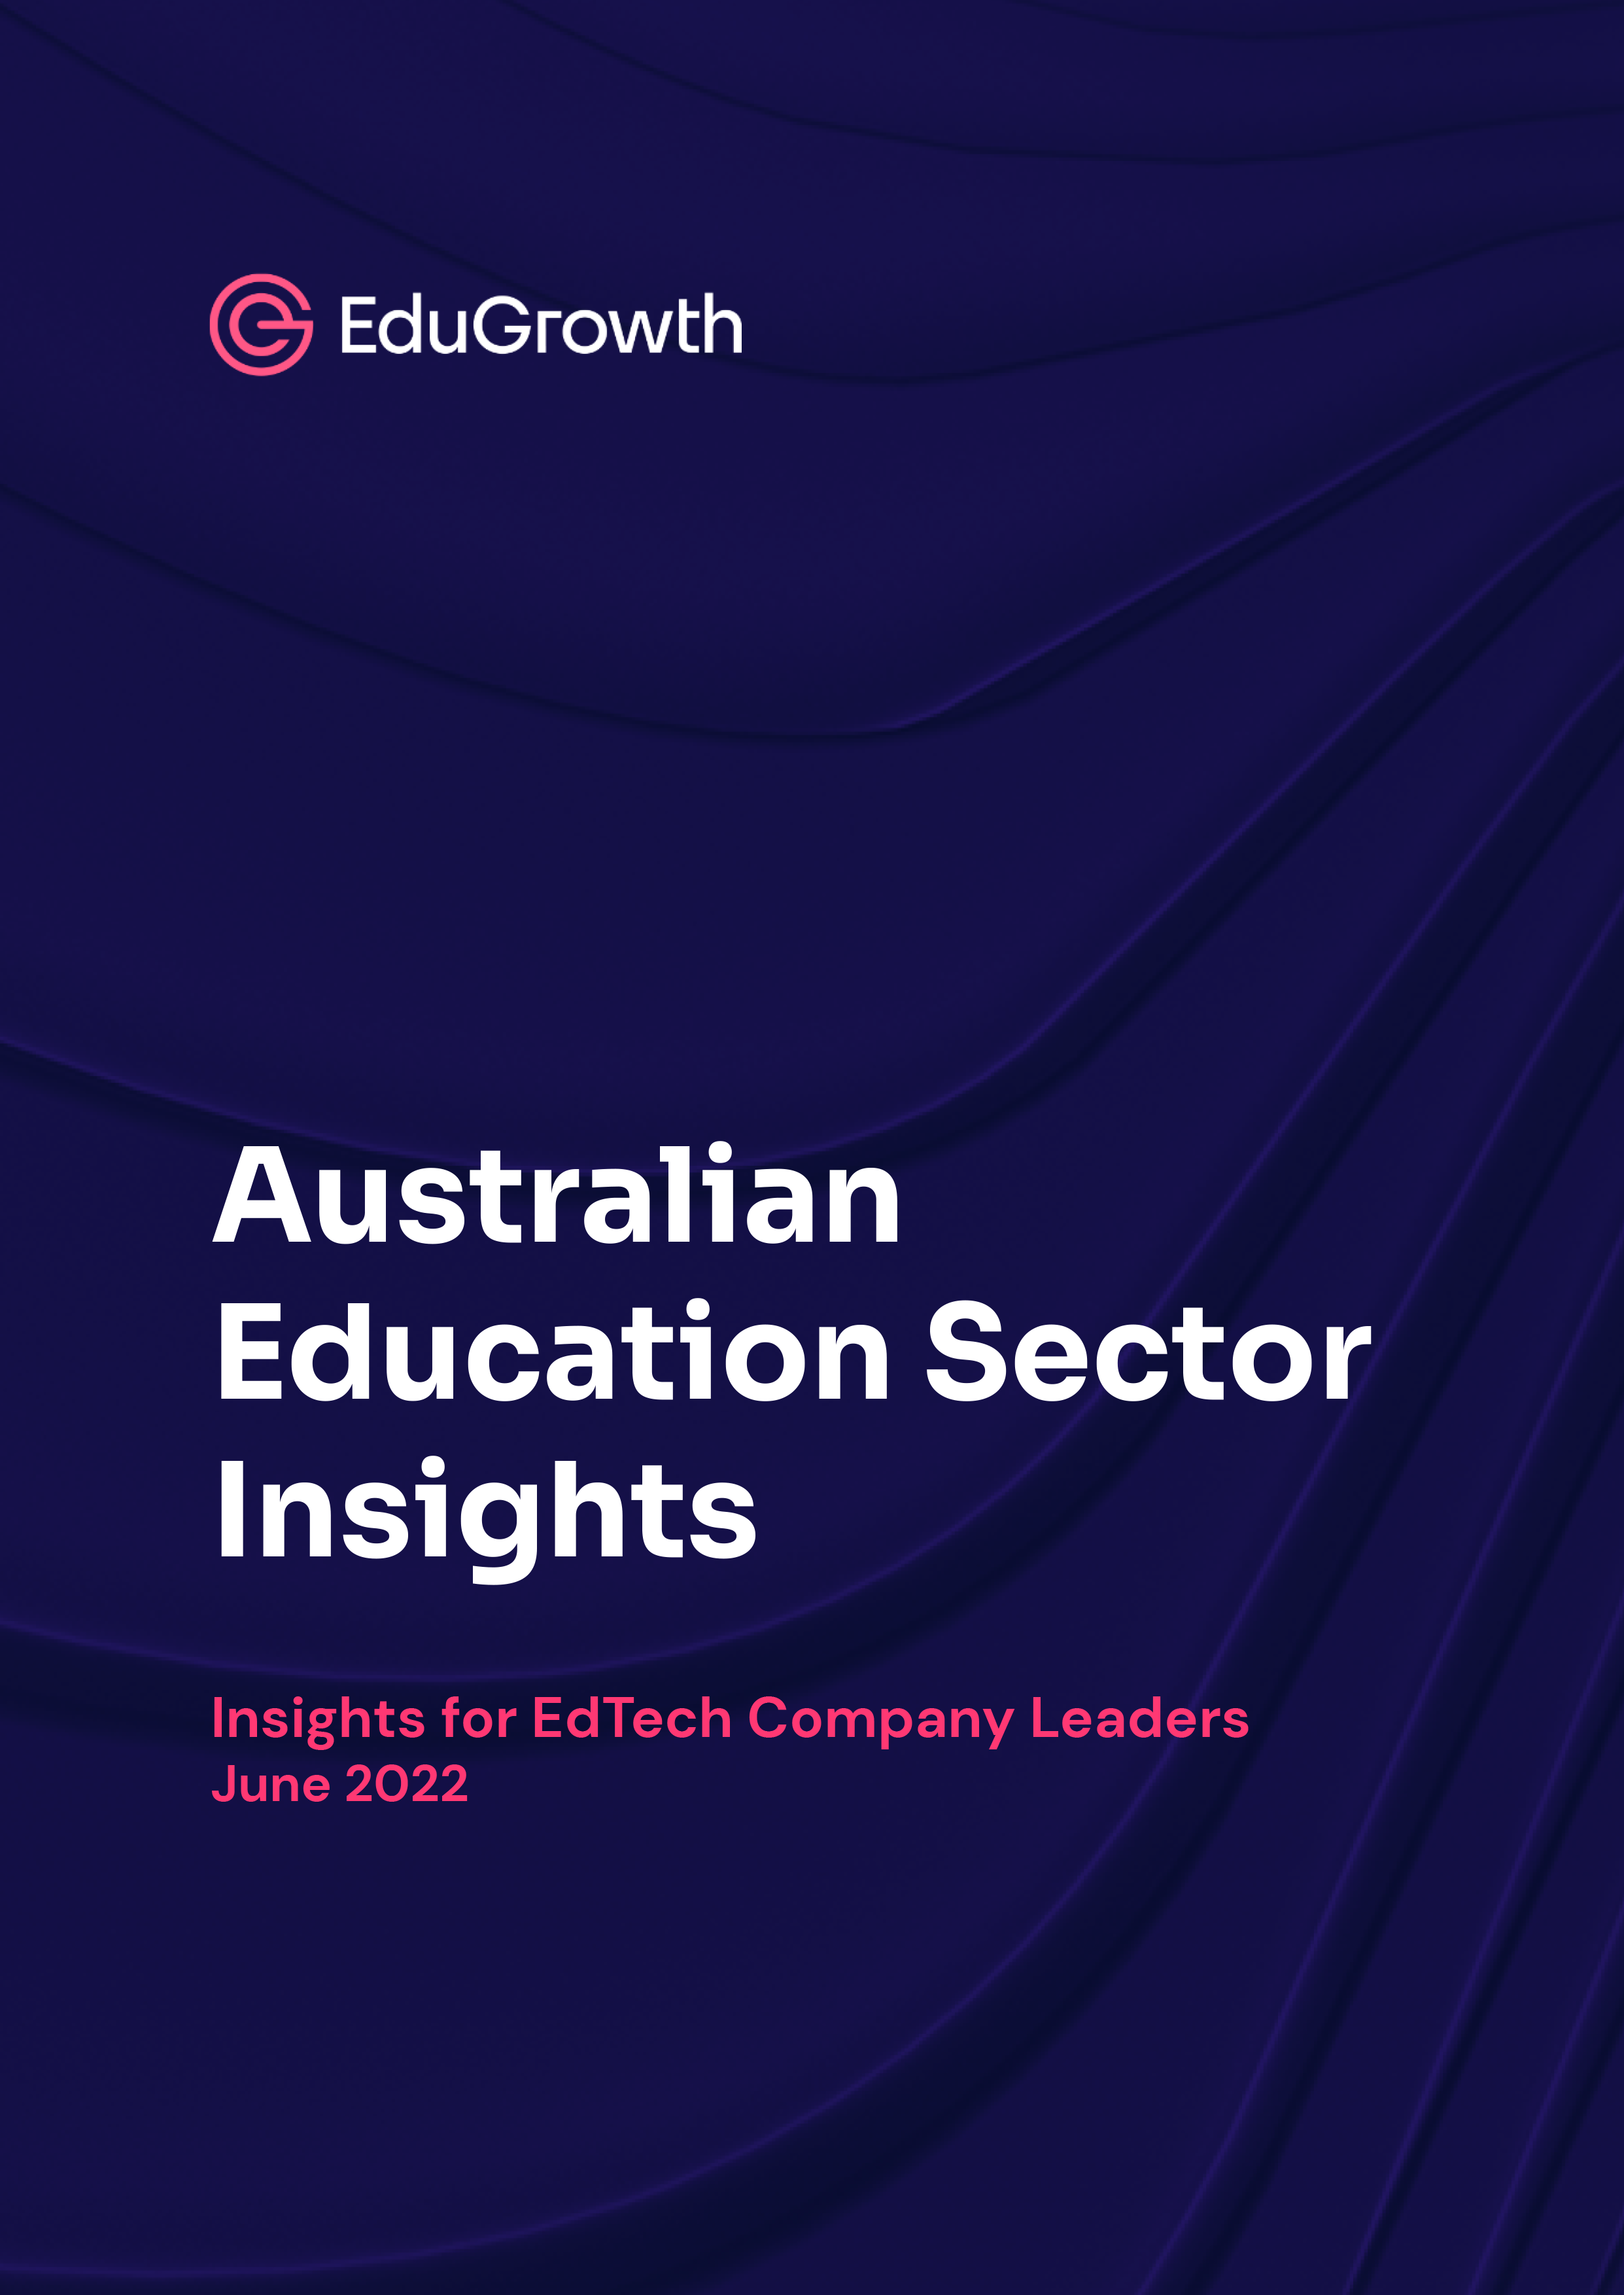 Designing an EdTech Efficacy Research Report - Cover - Global Victoria EdTech Innovation Alliance